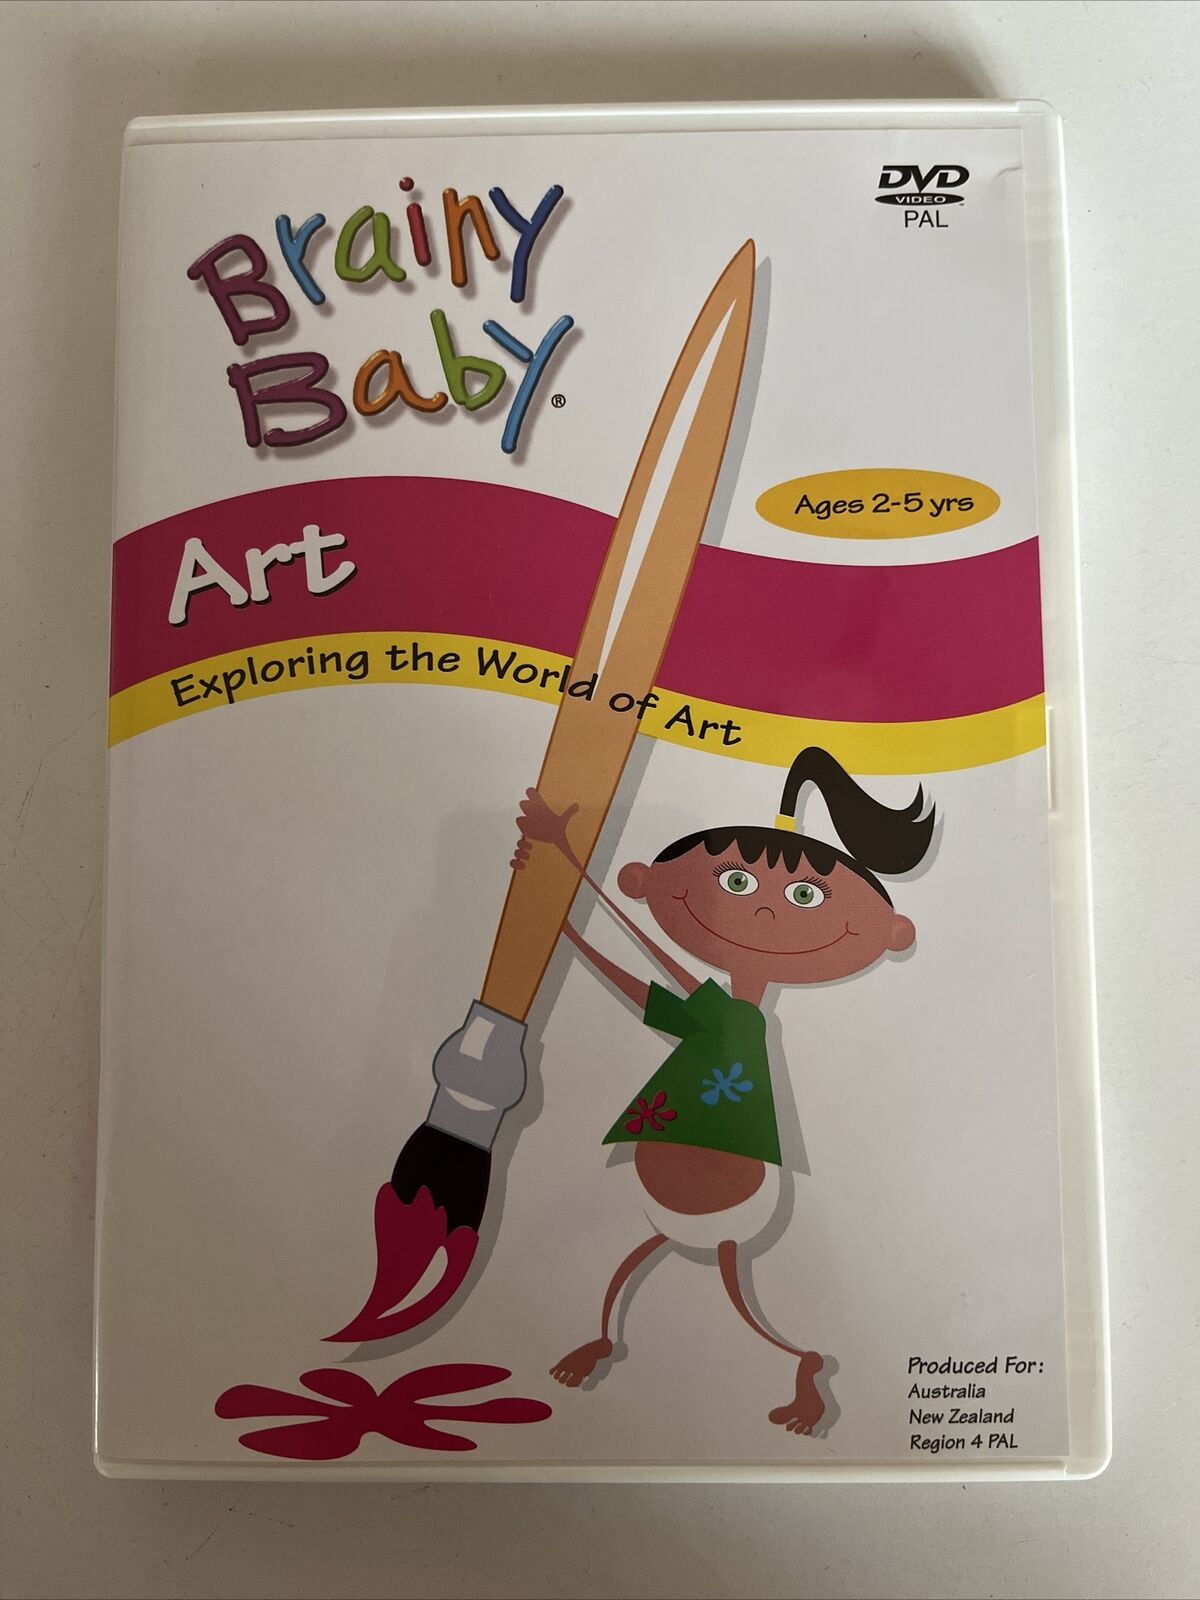 Brainy Baby: Art - Exploring the World of Art - Ages 2-5 Years (DVD) Early Learn